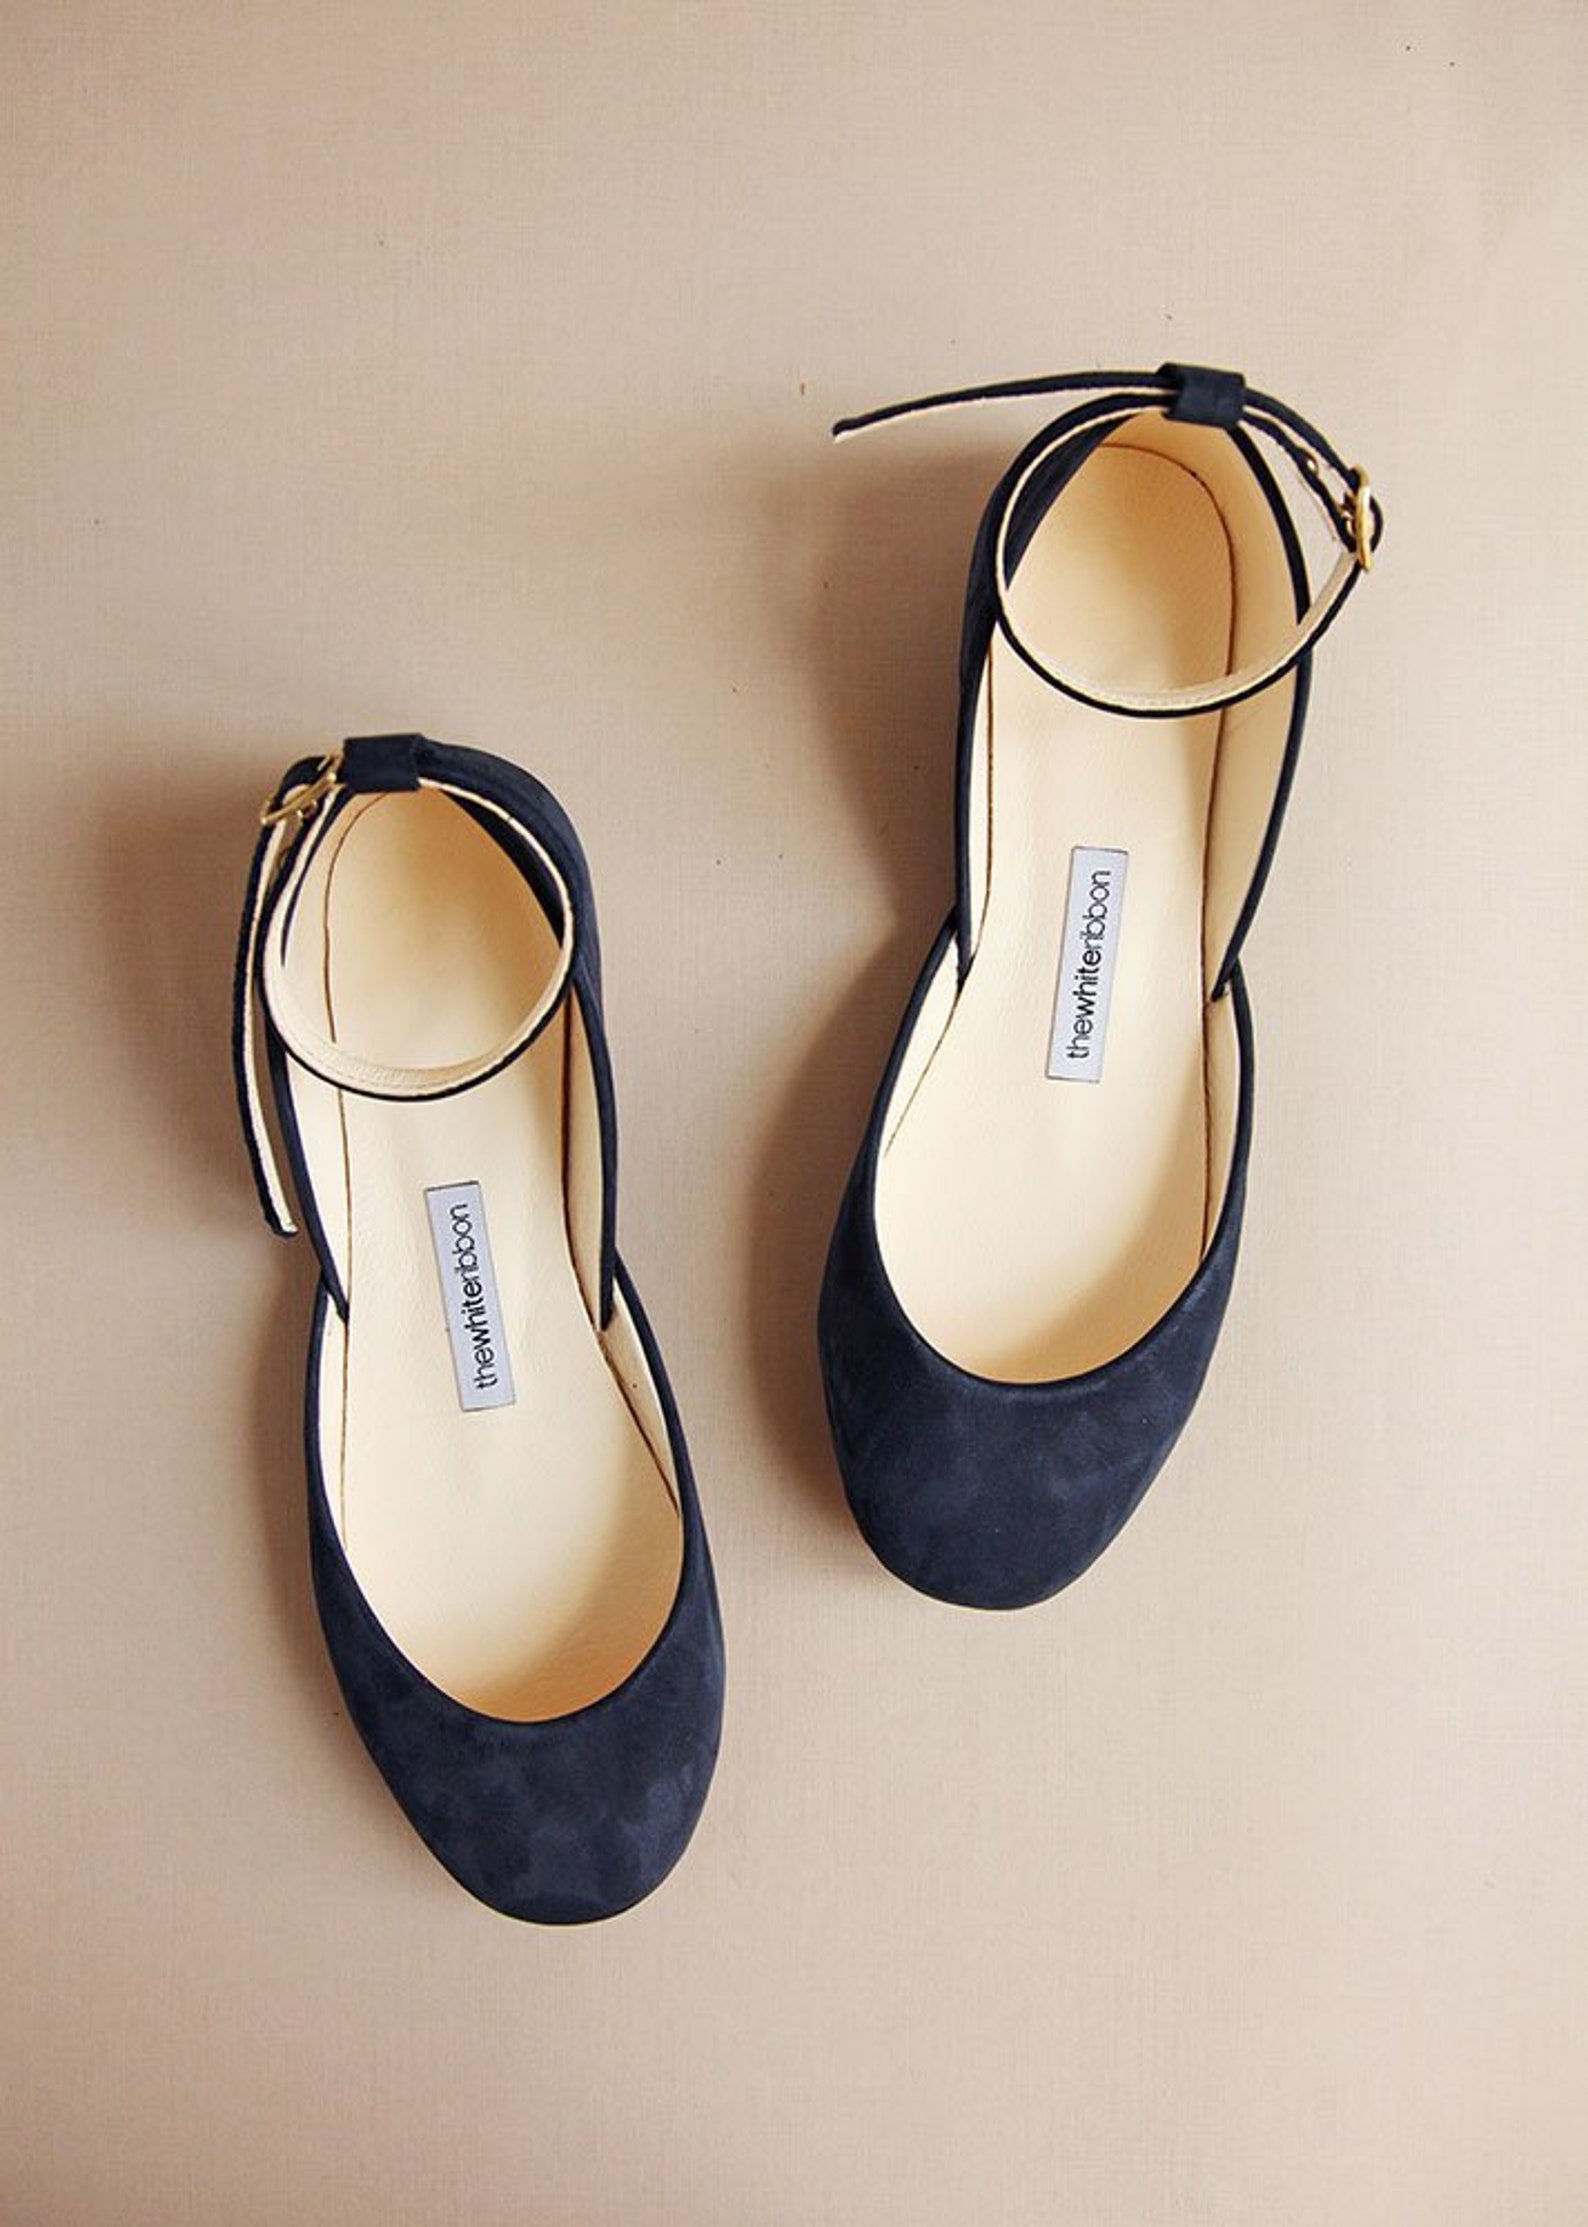 the navy blue wedding ballet flats | bridal shoes with satin ribbons | pointe style shoes ... navy nubuck ... ready to ship